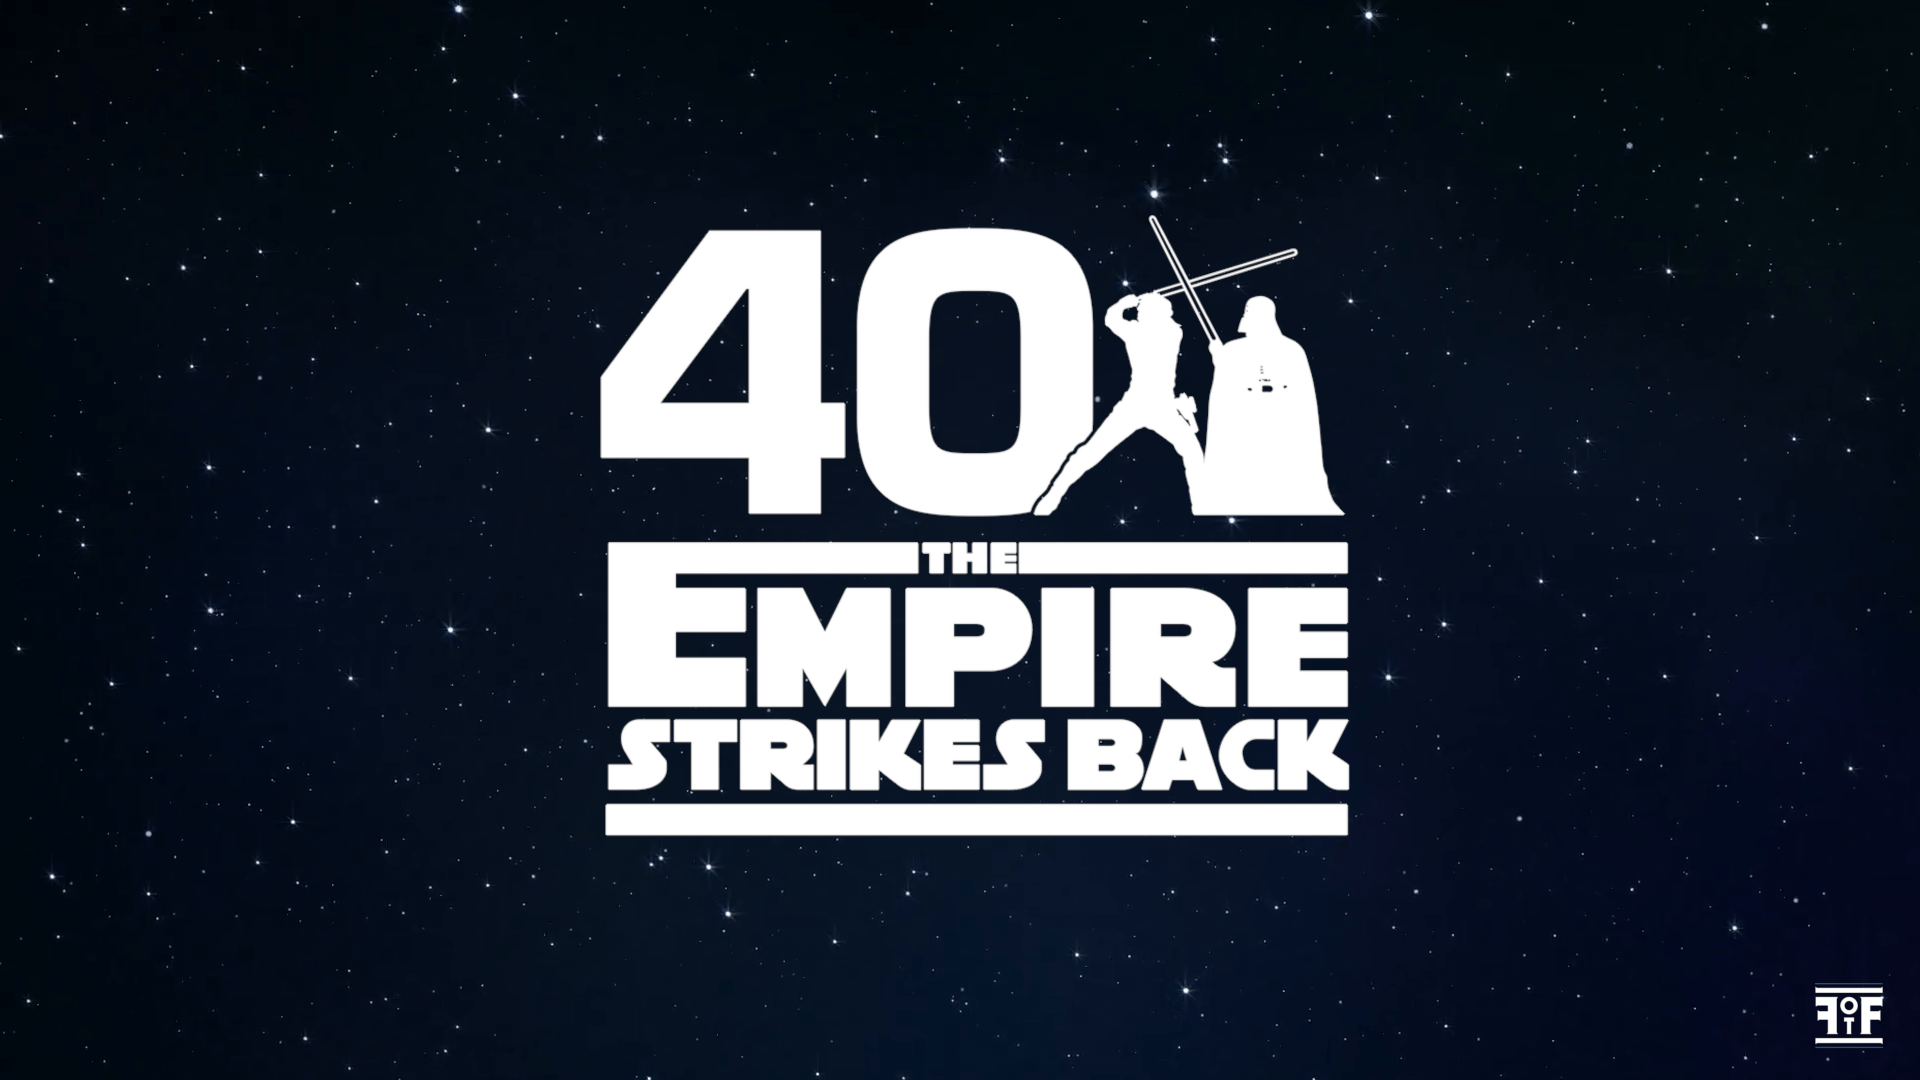 Star Wars: The Empire Strikes Back. Celebrating The 40th Anniversary. Future of the Force